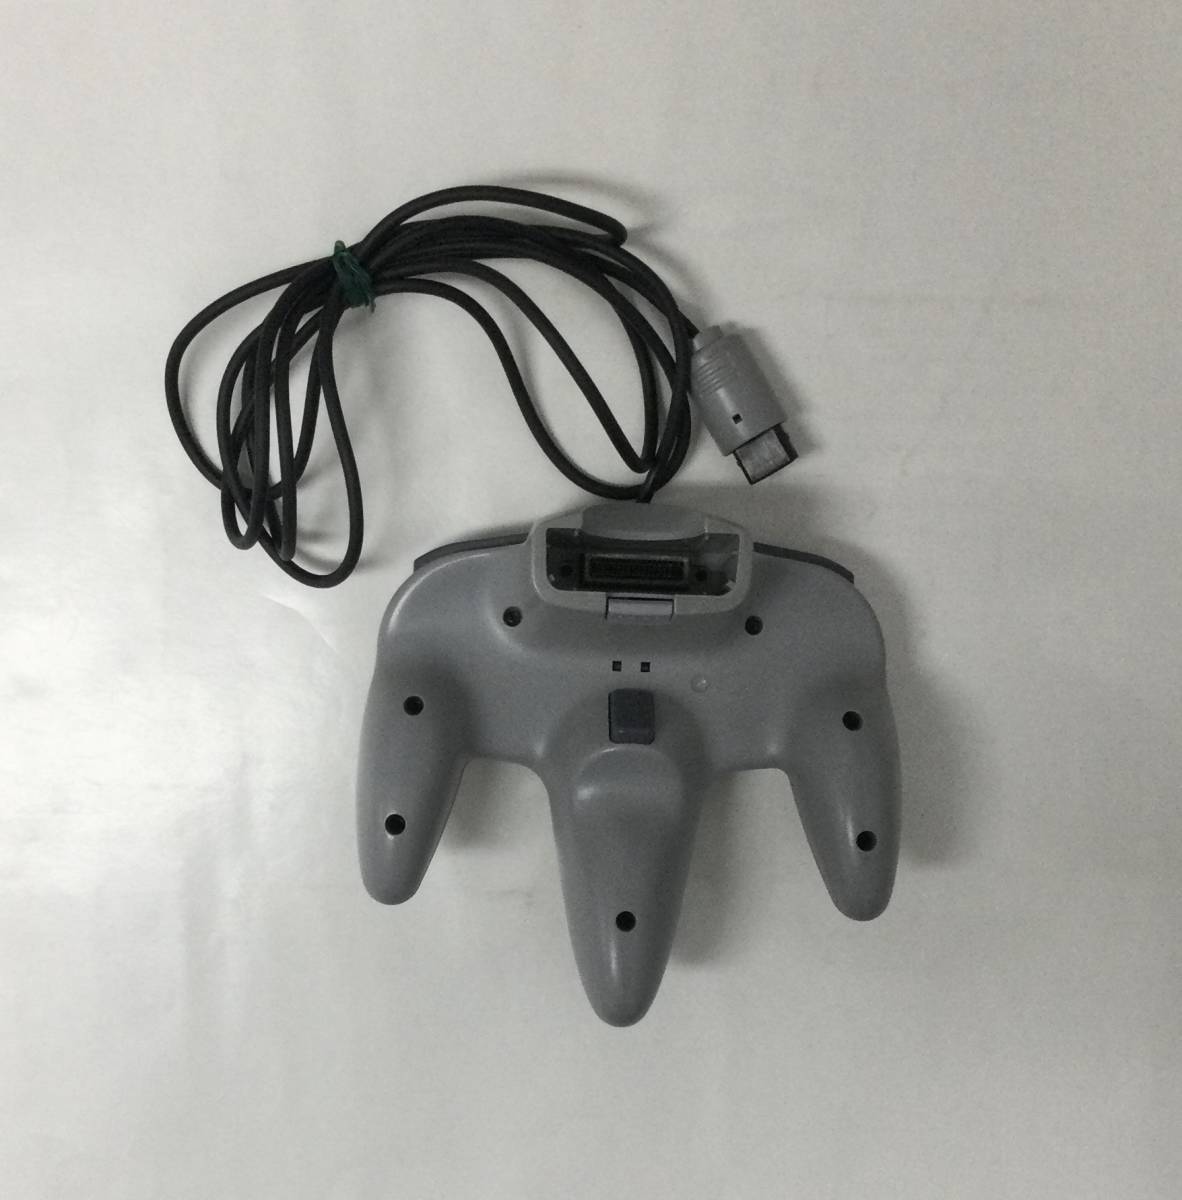 24N64-013 nintendo Nintendo 64 N64 controller gray retro game soft operation verification settled use impression equipped 